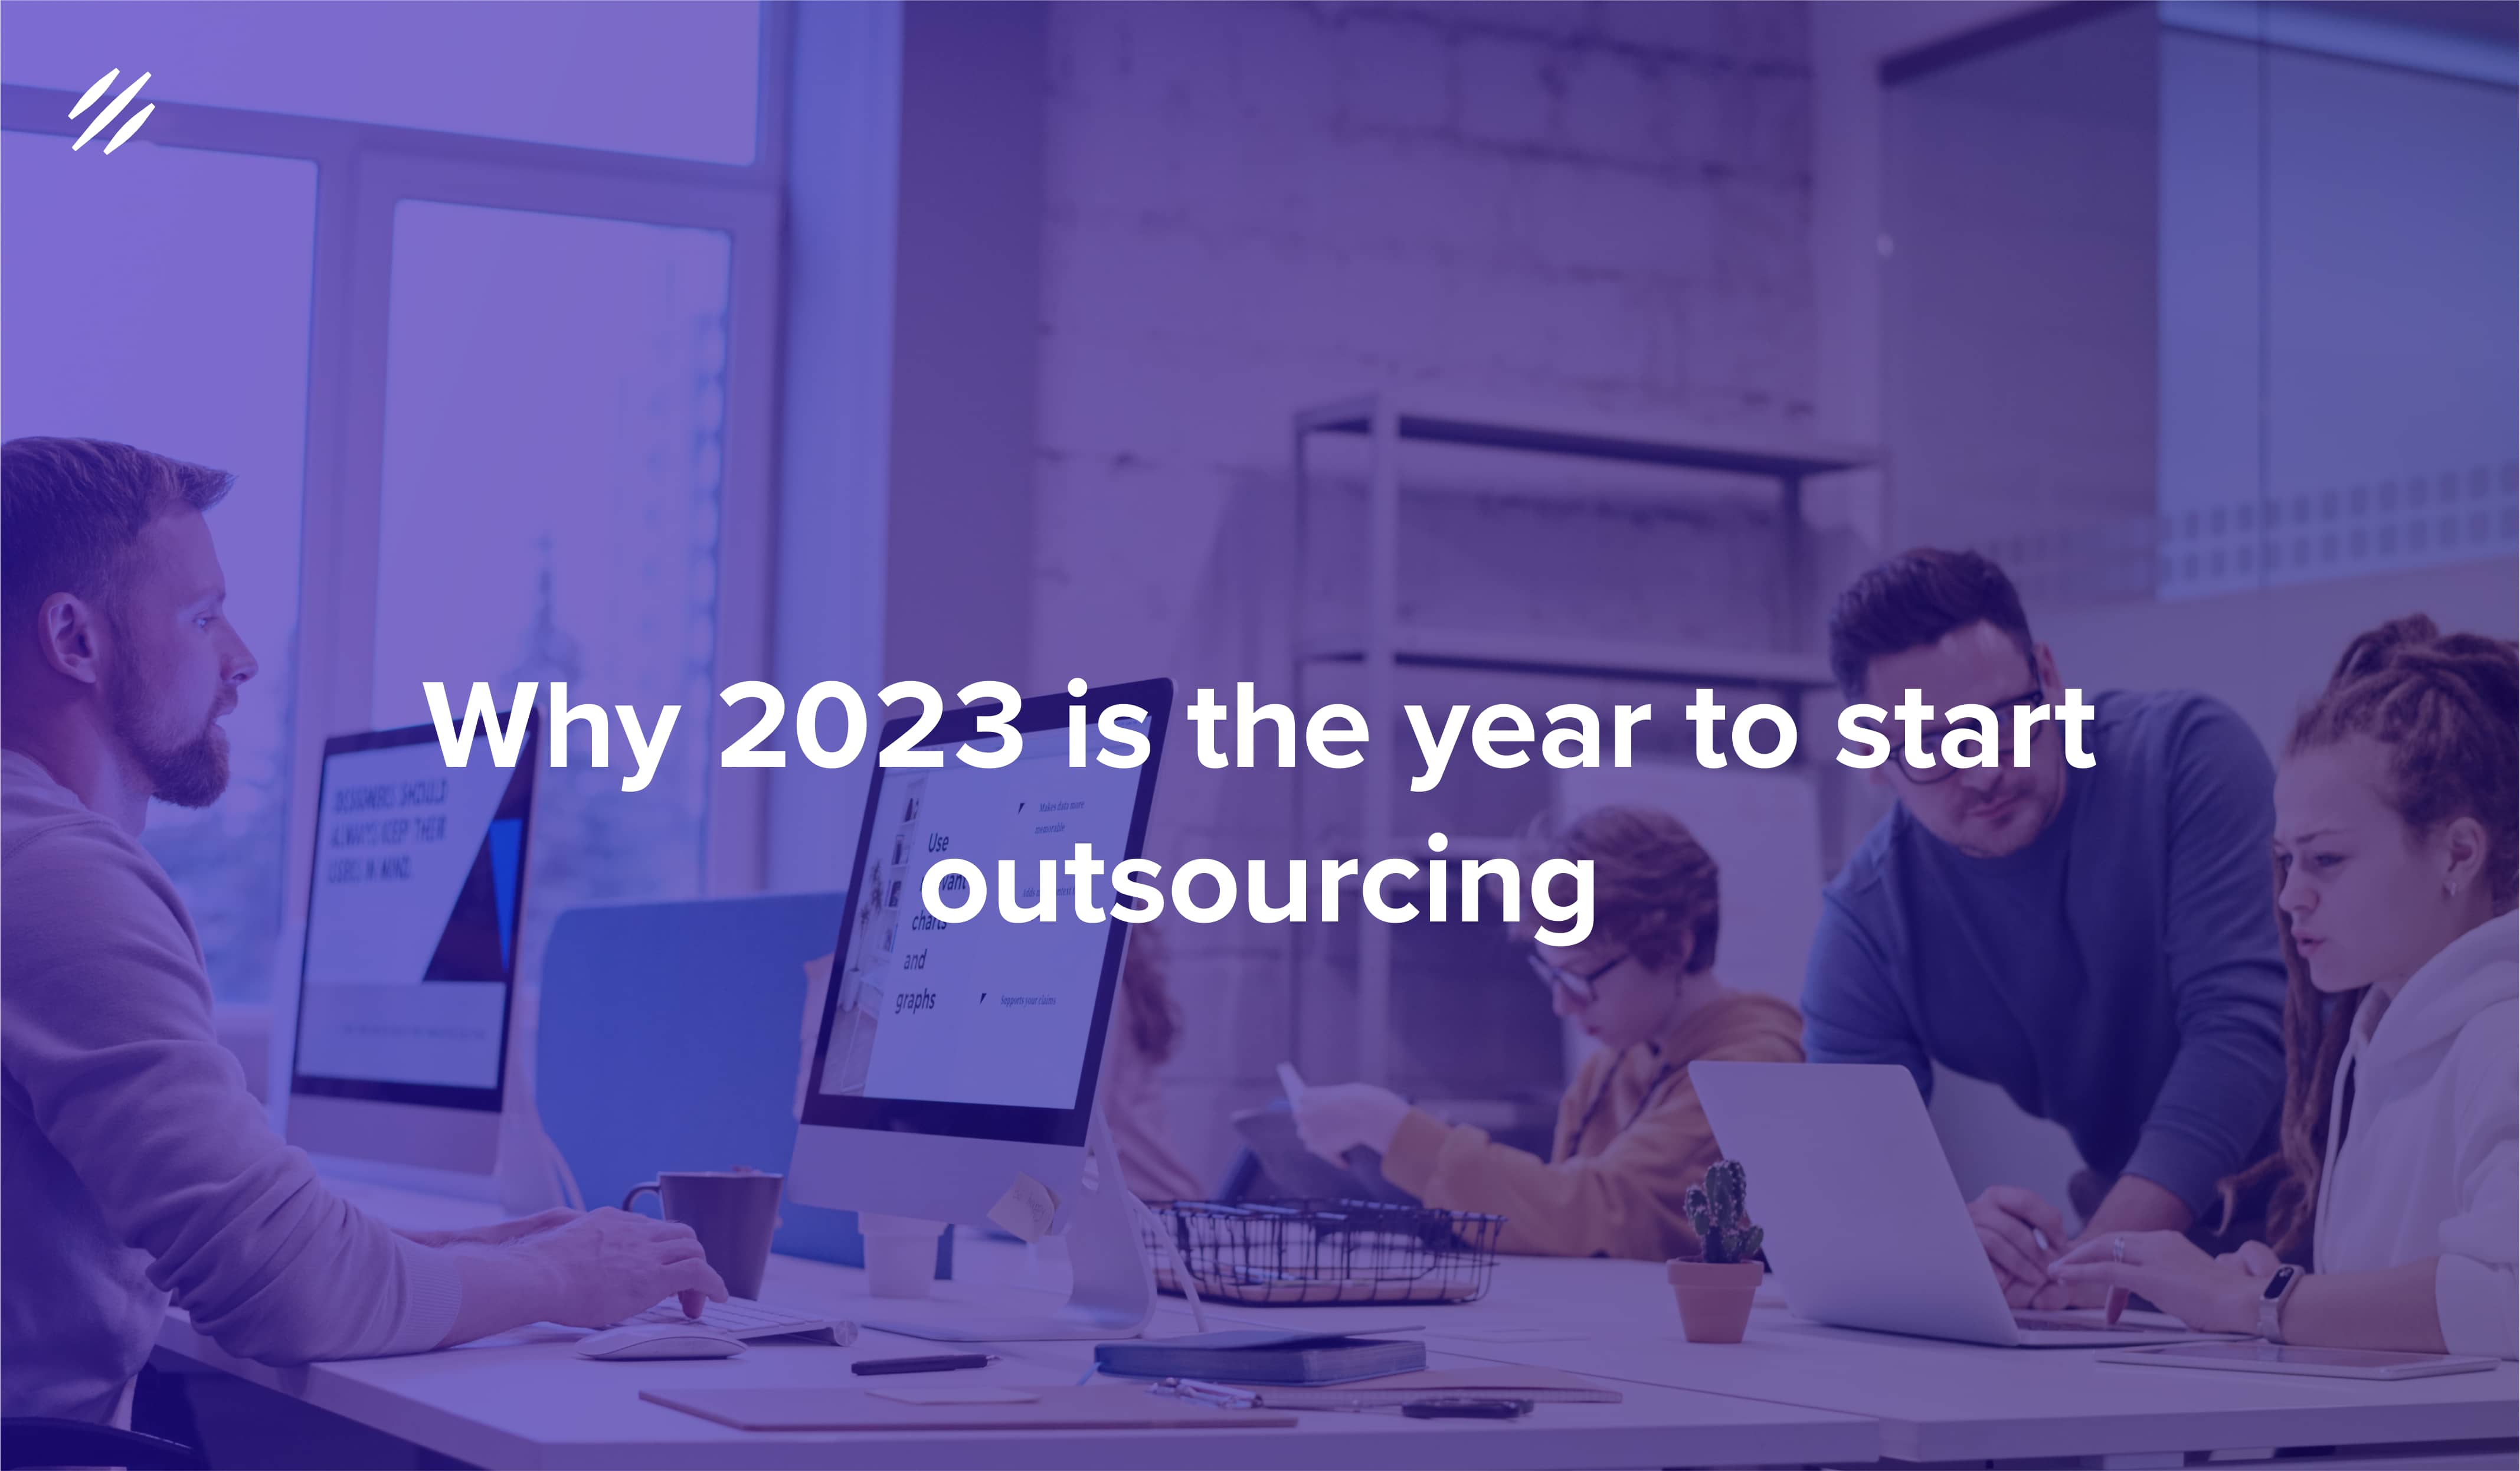 2023 Is the Year to Outsource: Why Businesses Need to Start Considering Outsourcing Now